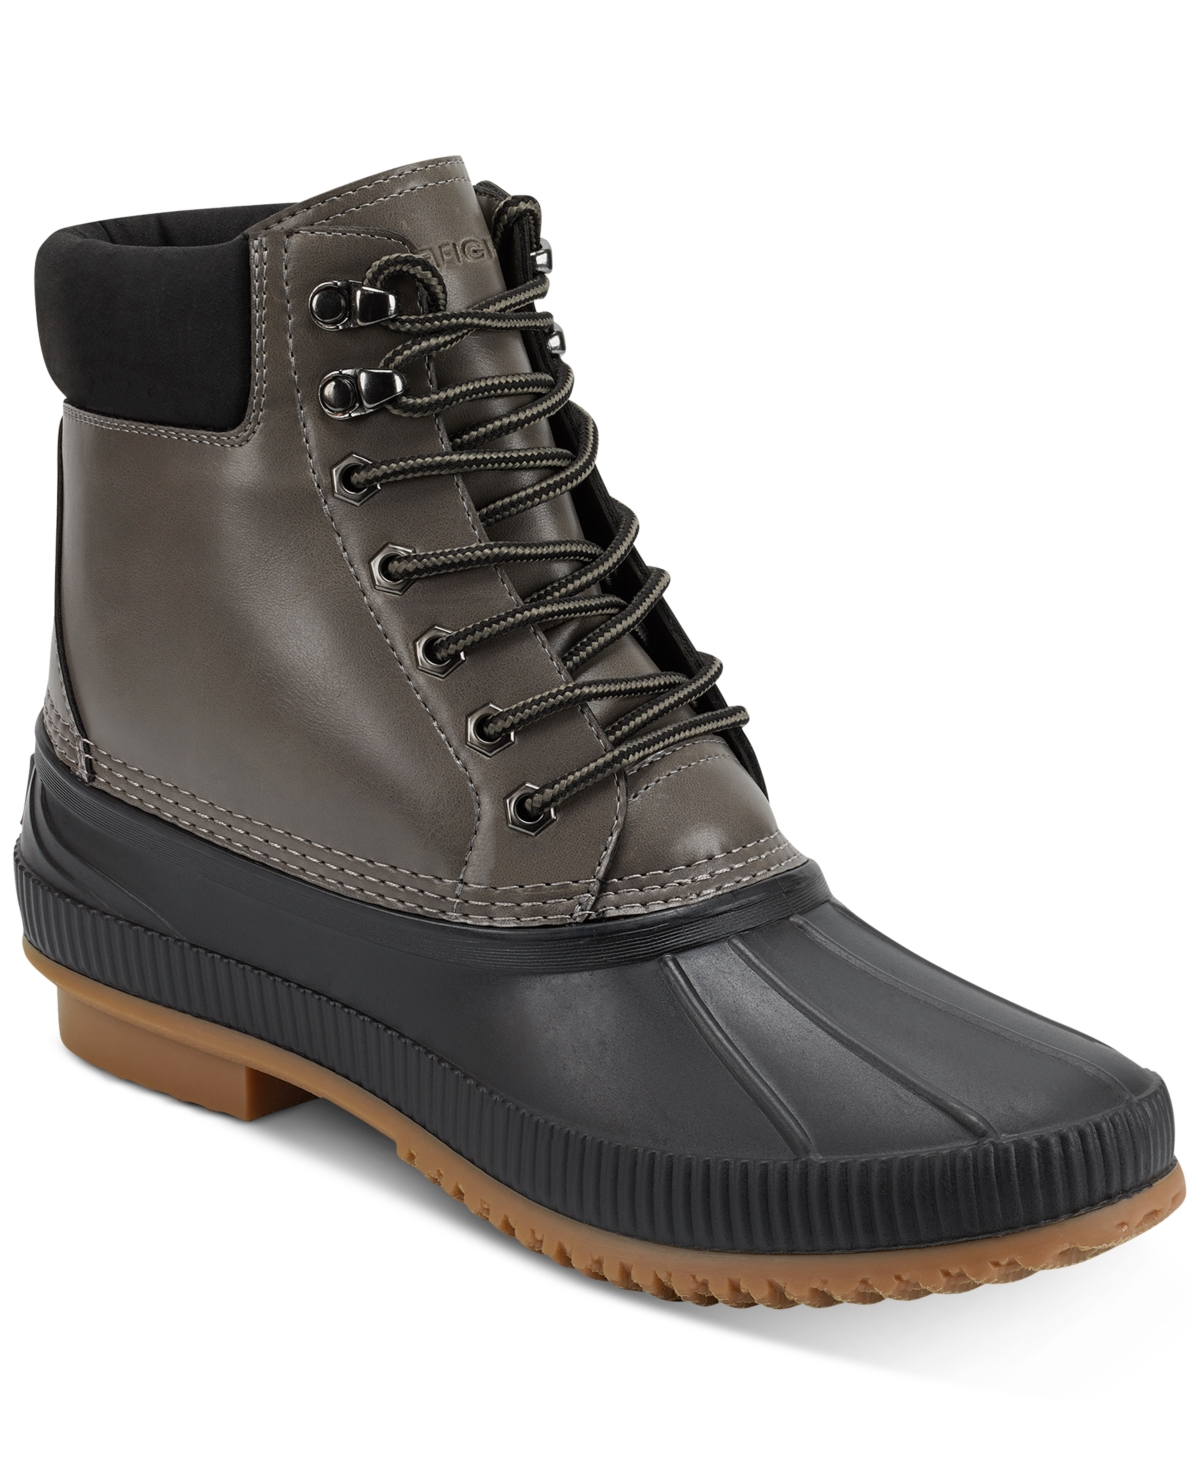 UPC 194009399163 product image for Tommy Hilfiger Men's Colins 2 Waterproof Duck Boots Men's Shoes | upcitemdb.com